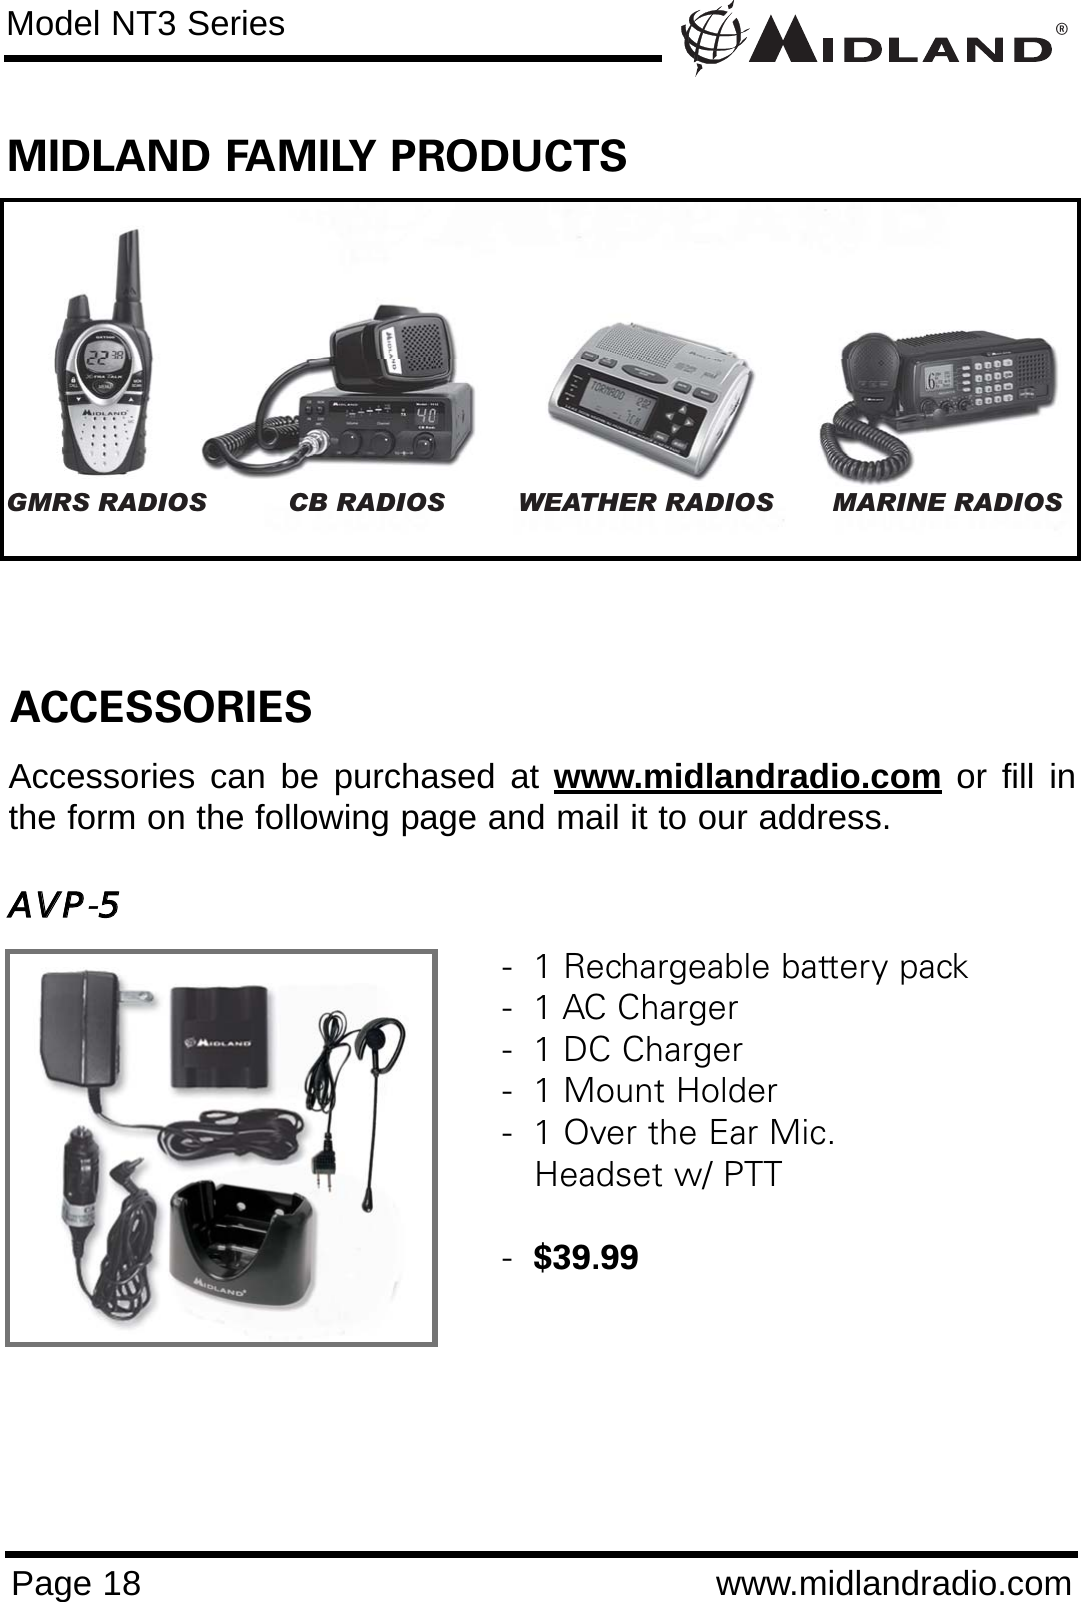 ®Page 18 www.midlandradio.comModel NT3 SeriesGMRS RADIOS CB RADIOS WEATHER RADIOS MARINE RADIOSACCESSORIESAccessories can be purchased at www.midlandradio.com or fill inthe form on the following page and mail it to our address.AAVVPP-55-  1 Rechargeable battery pack-  1 AC Charger-  1 DC Charger-  1 Mount Holder-  1 Over the Ear Mic. Headset w/ PTT  -  $39.99MIDLAND FAMILY PRODUCTS